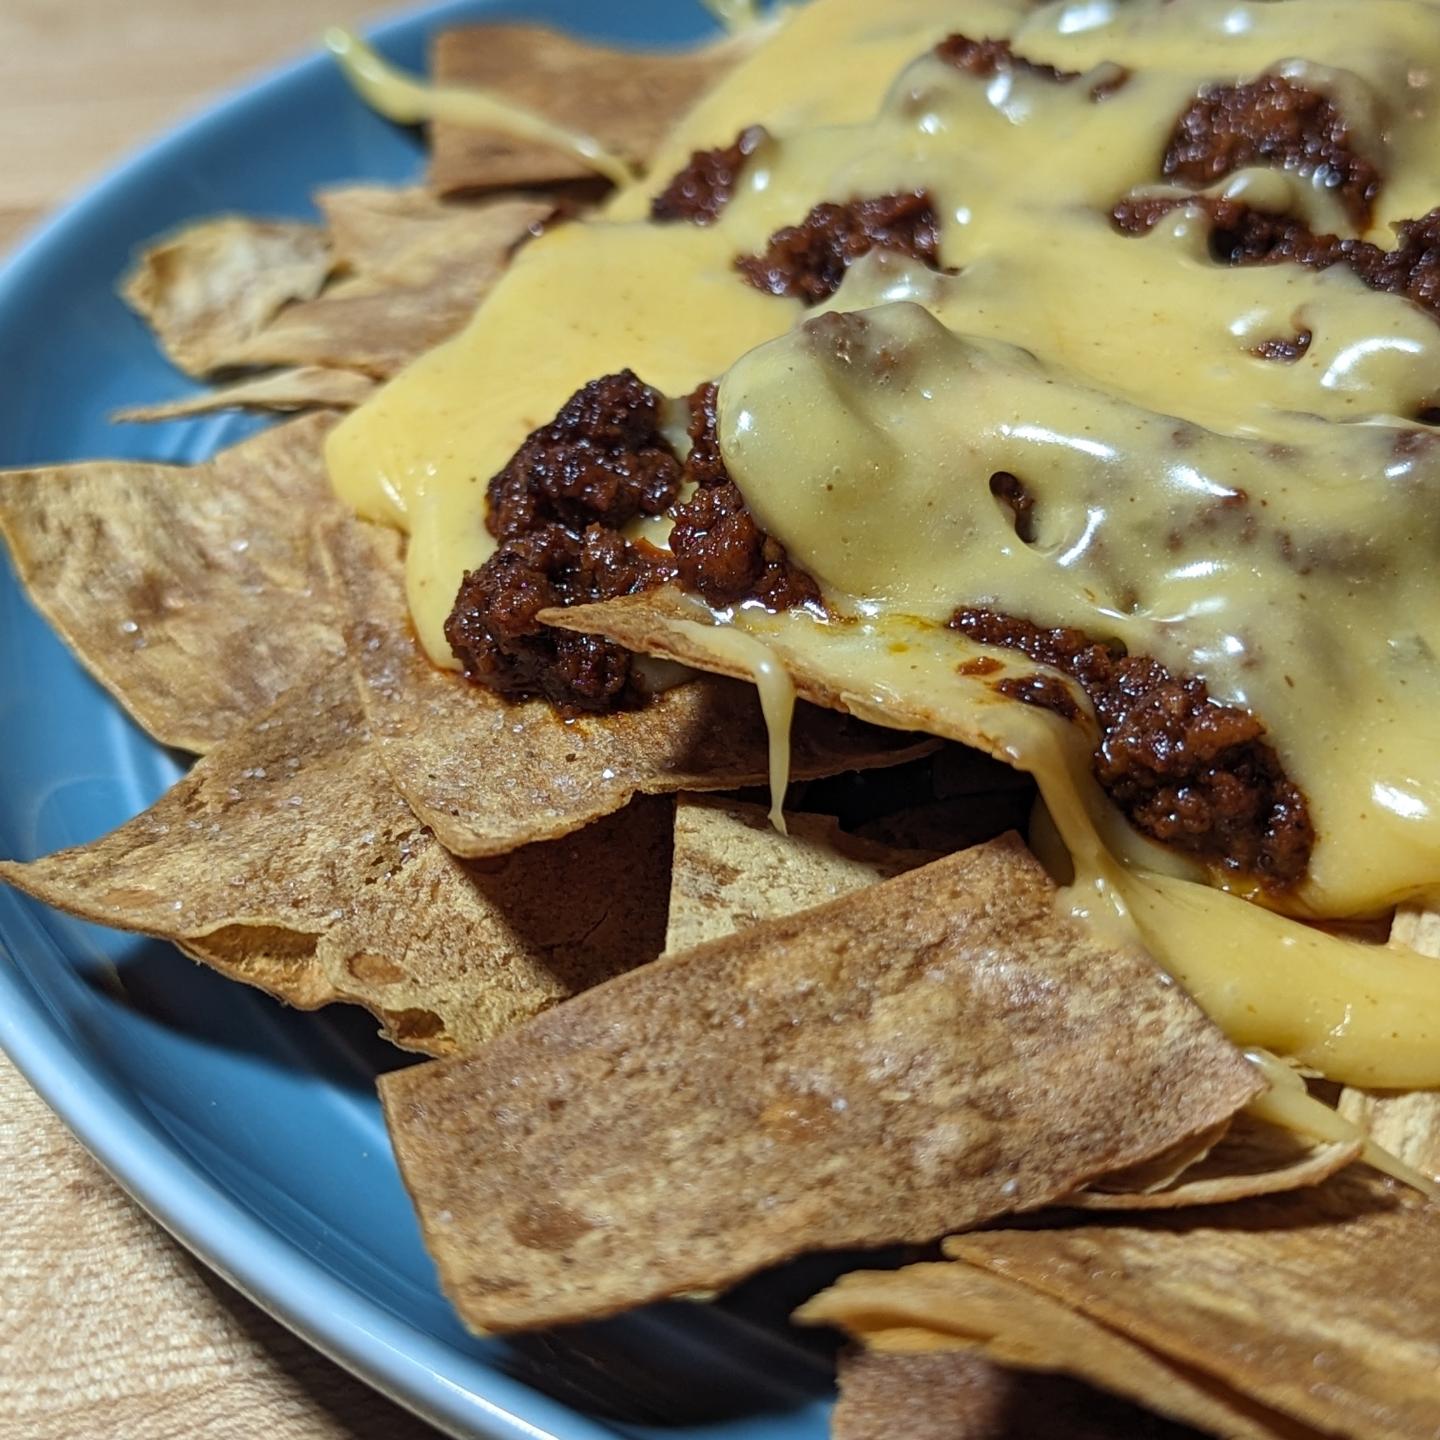 Low carb chorizo nachosThis was a lot of fun, my first time using Sodium Citrate. The cheese sauce was totally like the canned stuff but made at home with ingredients I control! I warned 1 cup of heavy cream on the stove and dissolved in a tablespoon sodium citrate (I would use less next time, or add more liquid) then with it fully integrated i slowly added in 1 lb of @tillamook sharp cheddar cheese (grated). As each handful melted in I added the next handful. I kept the cheese mix around 150 degrees through this process. Once all the cheese was mixed in I added a can of green chilies and a bit of @tdsbrewbbq zesty taco seasoning. I then bumped the heat slightly to thin the cheese out a little more (heat helps thin it). In the oven I cooked some @cutdacarb which I had sliced and sprayed with avocado oil. 375 for about 8 minutes, then turned off the oven and they sat till ready to use. The @caciquefoods pork chorizo was cooked on the stove top. Then it was time to assemble. The layer of chips, then a layer of cheese sauce, the chorizo and one final layer of cheese sauce. I don't think I can call this one healthy, given I ate about half my cheese sauce so say a half lb of cheese and 1/2 cup of cream... And nearly a whole tube of chorizo... But it was damn good comfort food! #nachos #stadiumnachos #ballparknachos #cheesesauce #cheeserecipes #nachorecipe #comfortfood #chorizo #cheddarcheese